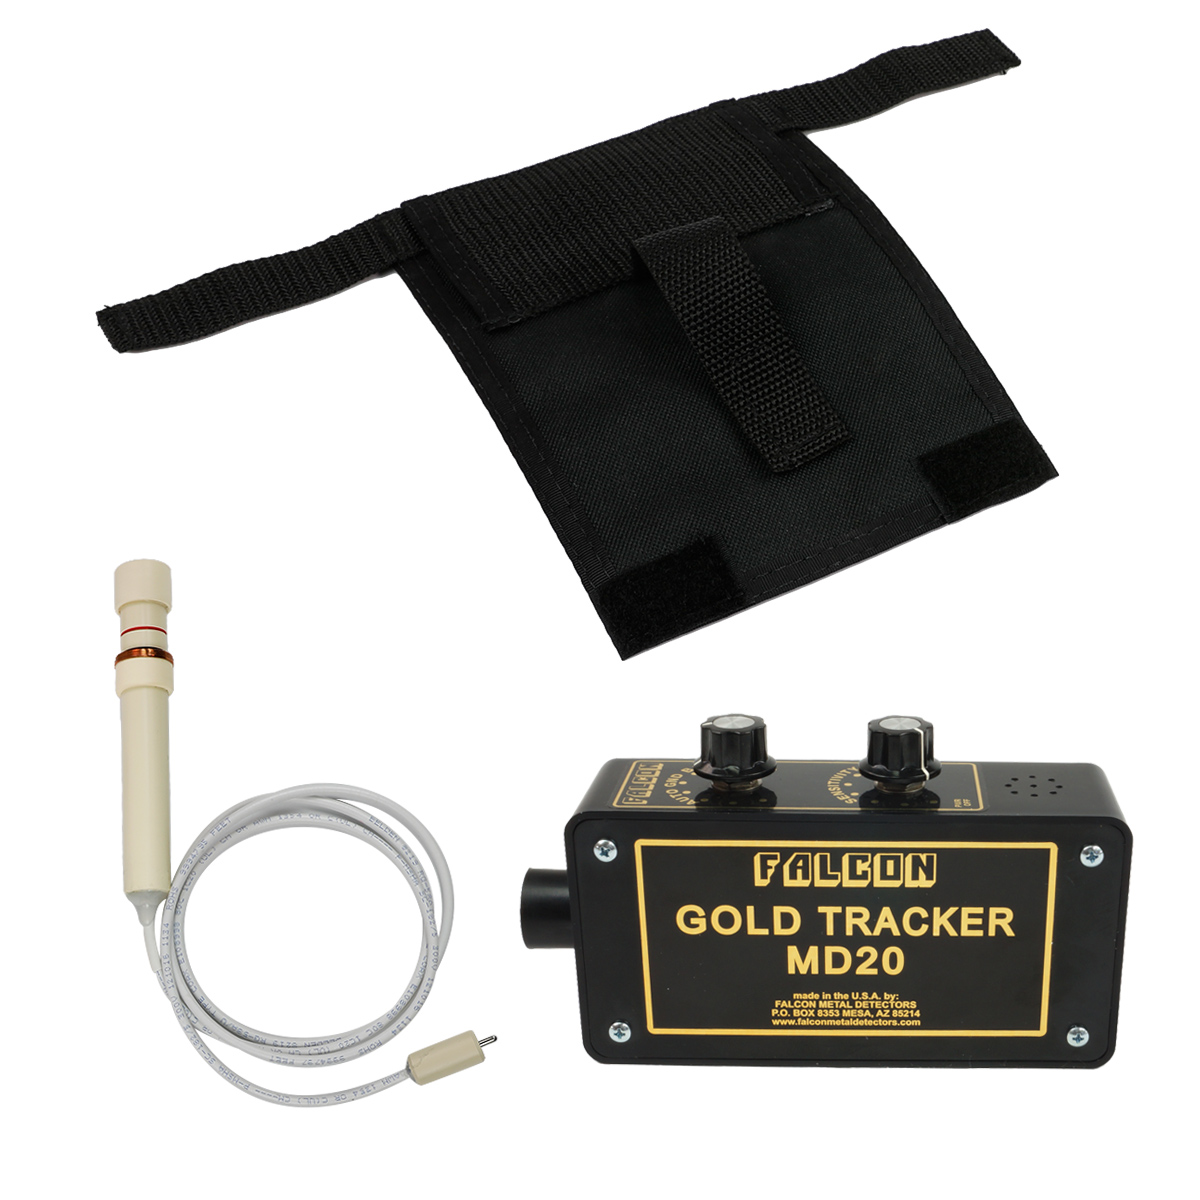 Falcon Gold Tracker MD20 Metal Detector 300kHz Probe with Belt Holster 